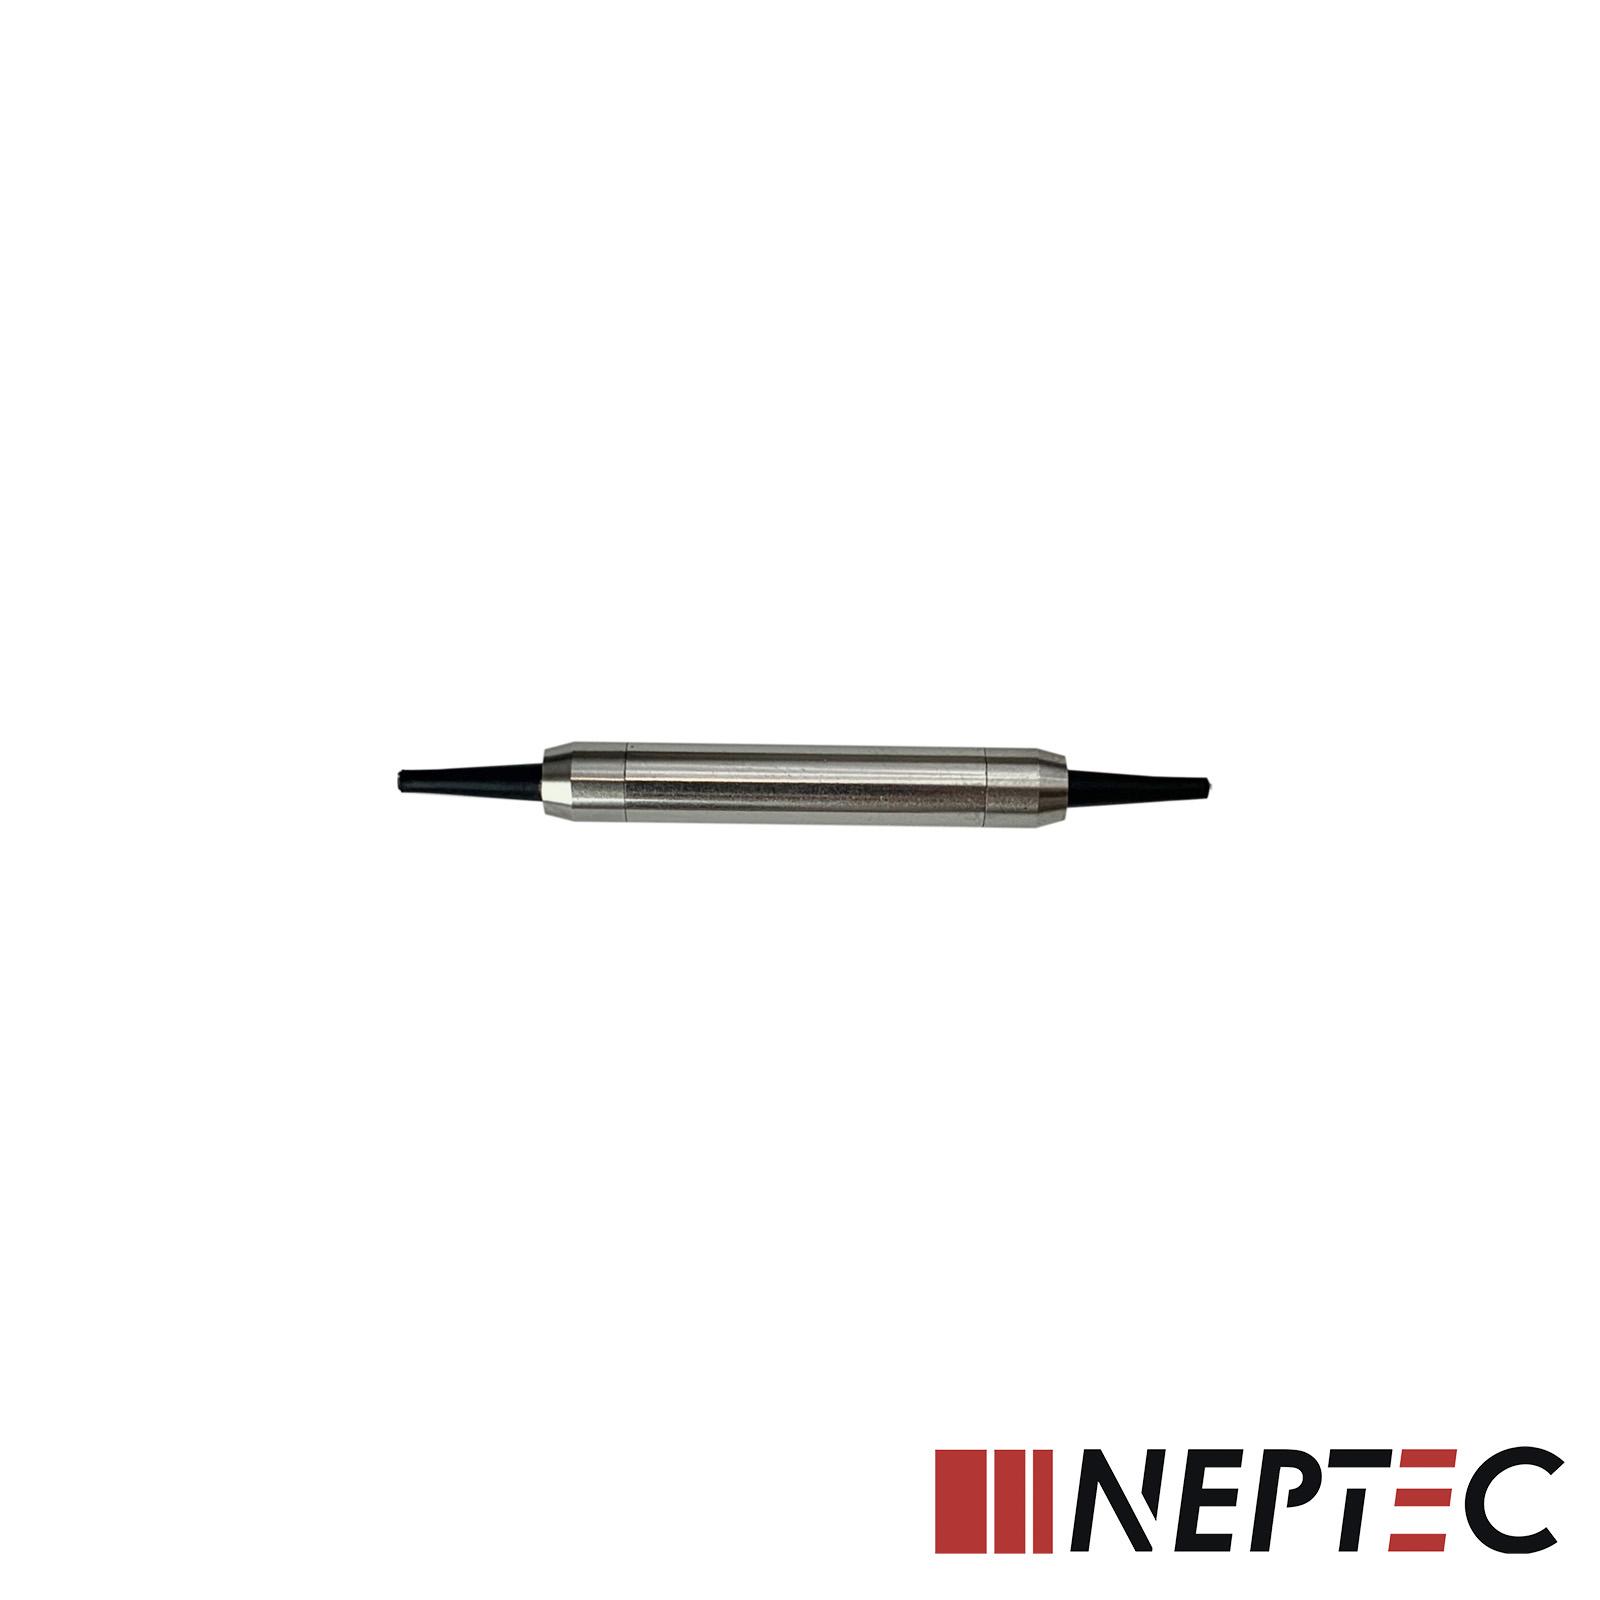 Product High Power Splitters/Couplers - Neptec image